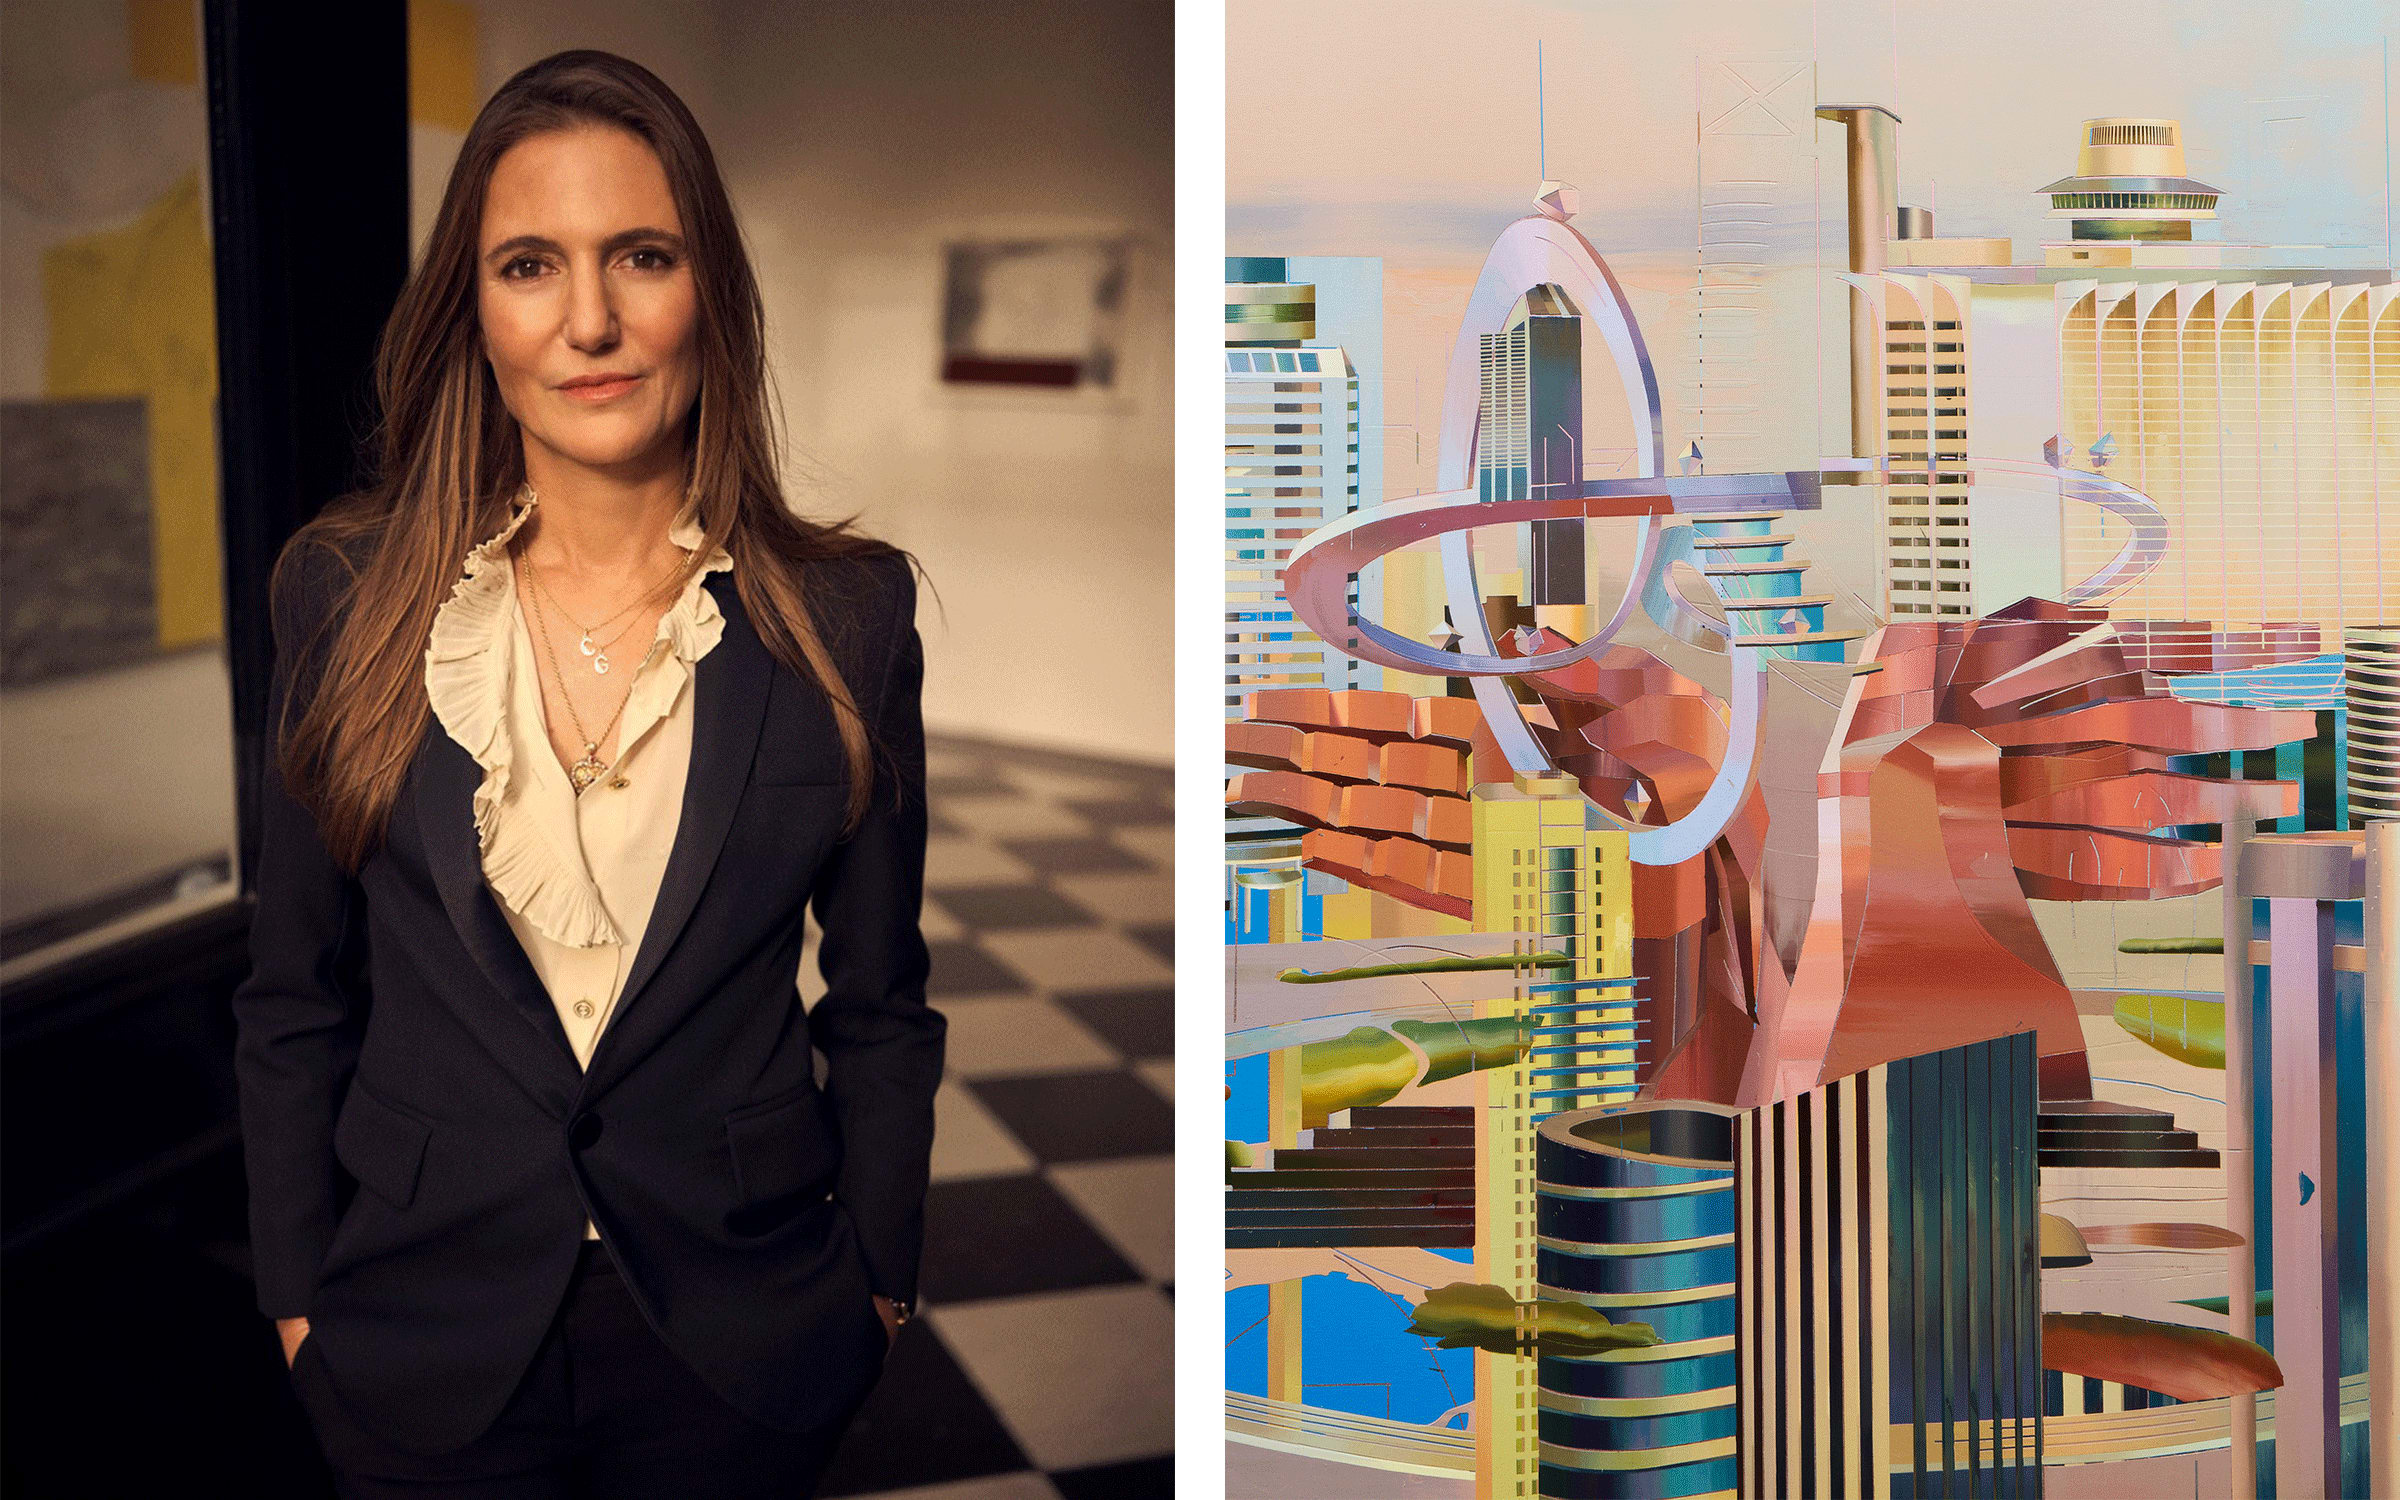 Left: Pilar Corrias. Courtesy of Pilar Corrias, photograph by Charlie Gray. Right: Artwork detail by Cui Jie presented by Pilar Corrias in the Unlimited sector at Art Basel in Basel 2022.